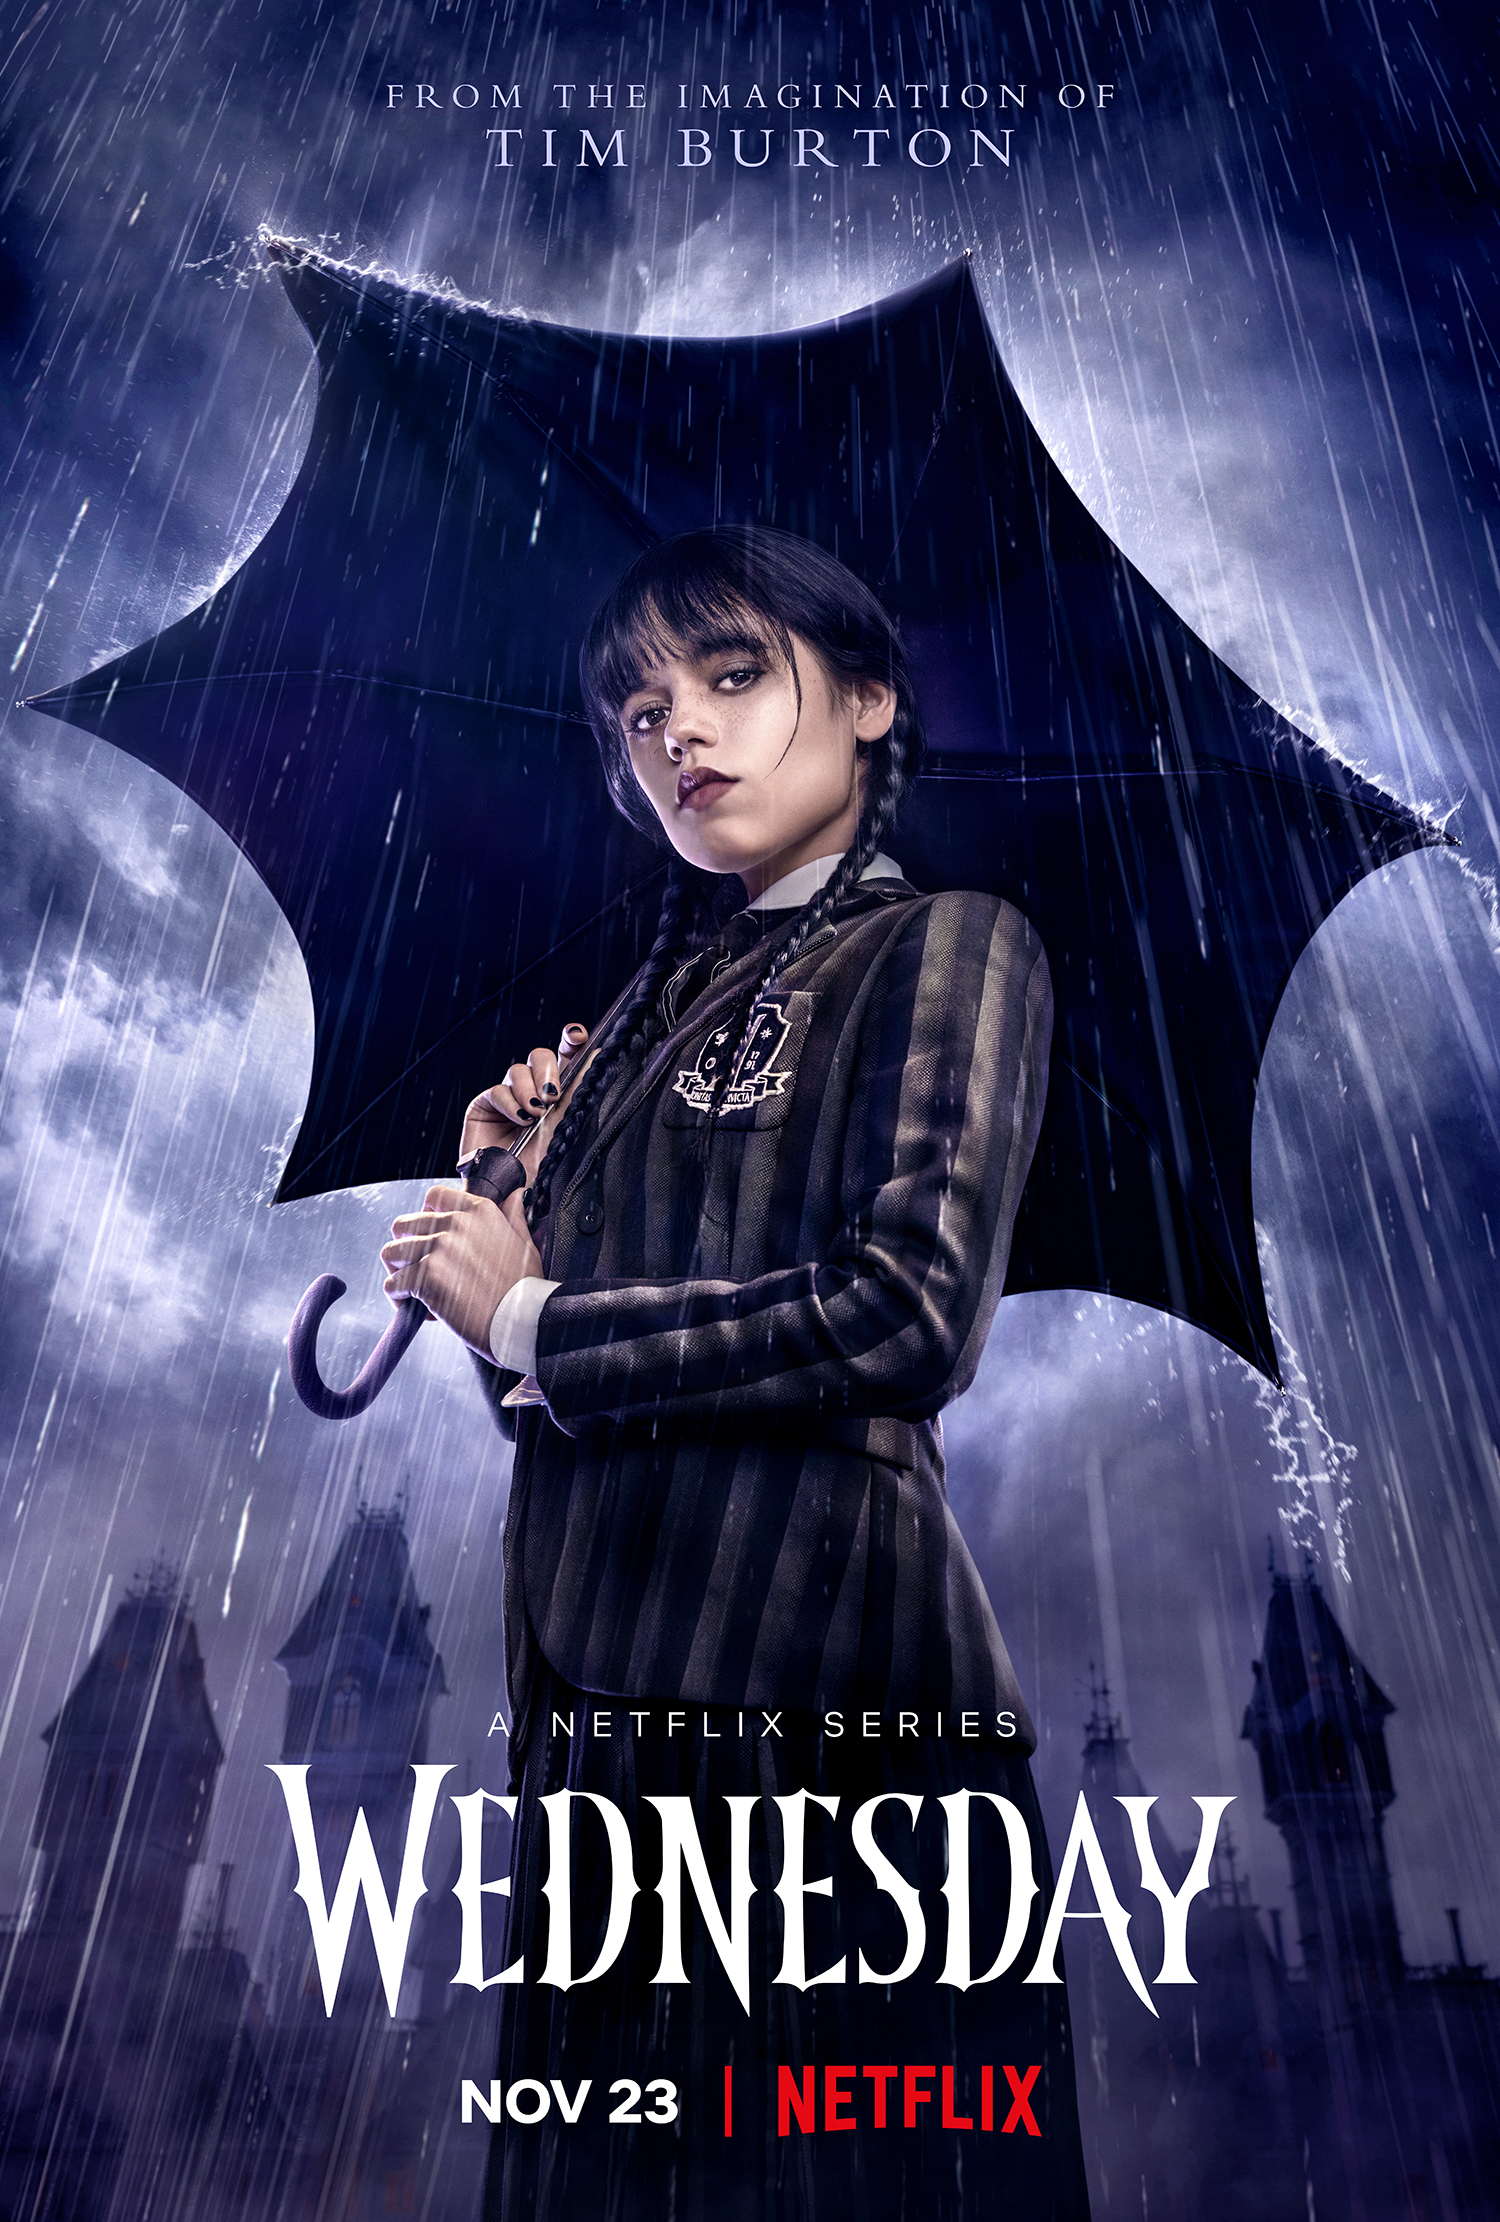 Jenna Ortega as Wednesday Addams, holding an umbrella in pouring rain, in key art for Netflix's Wednesday.